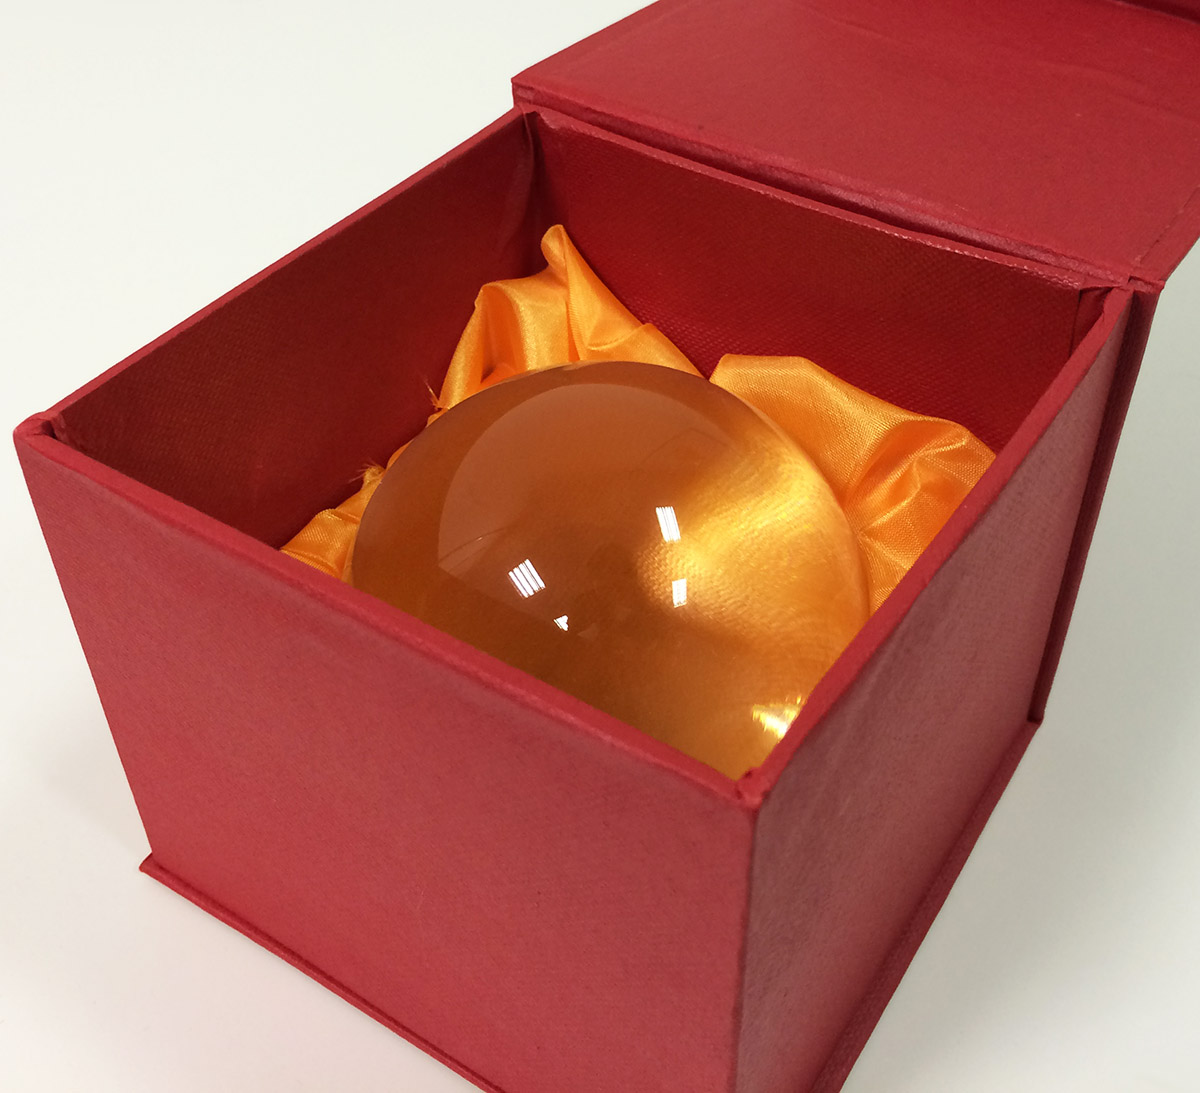 transparent glass sphere with gift box